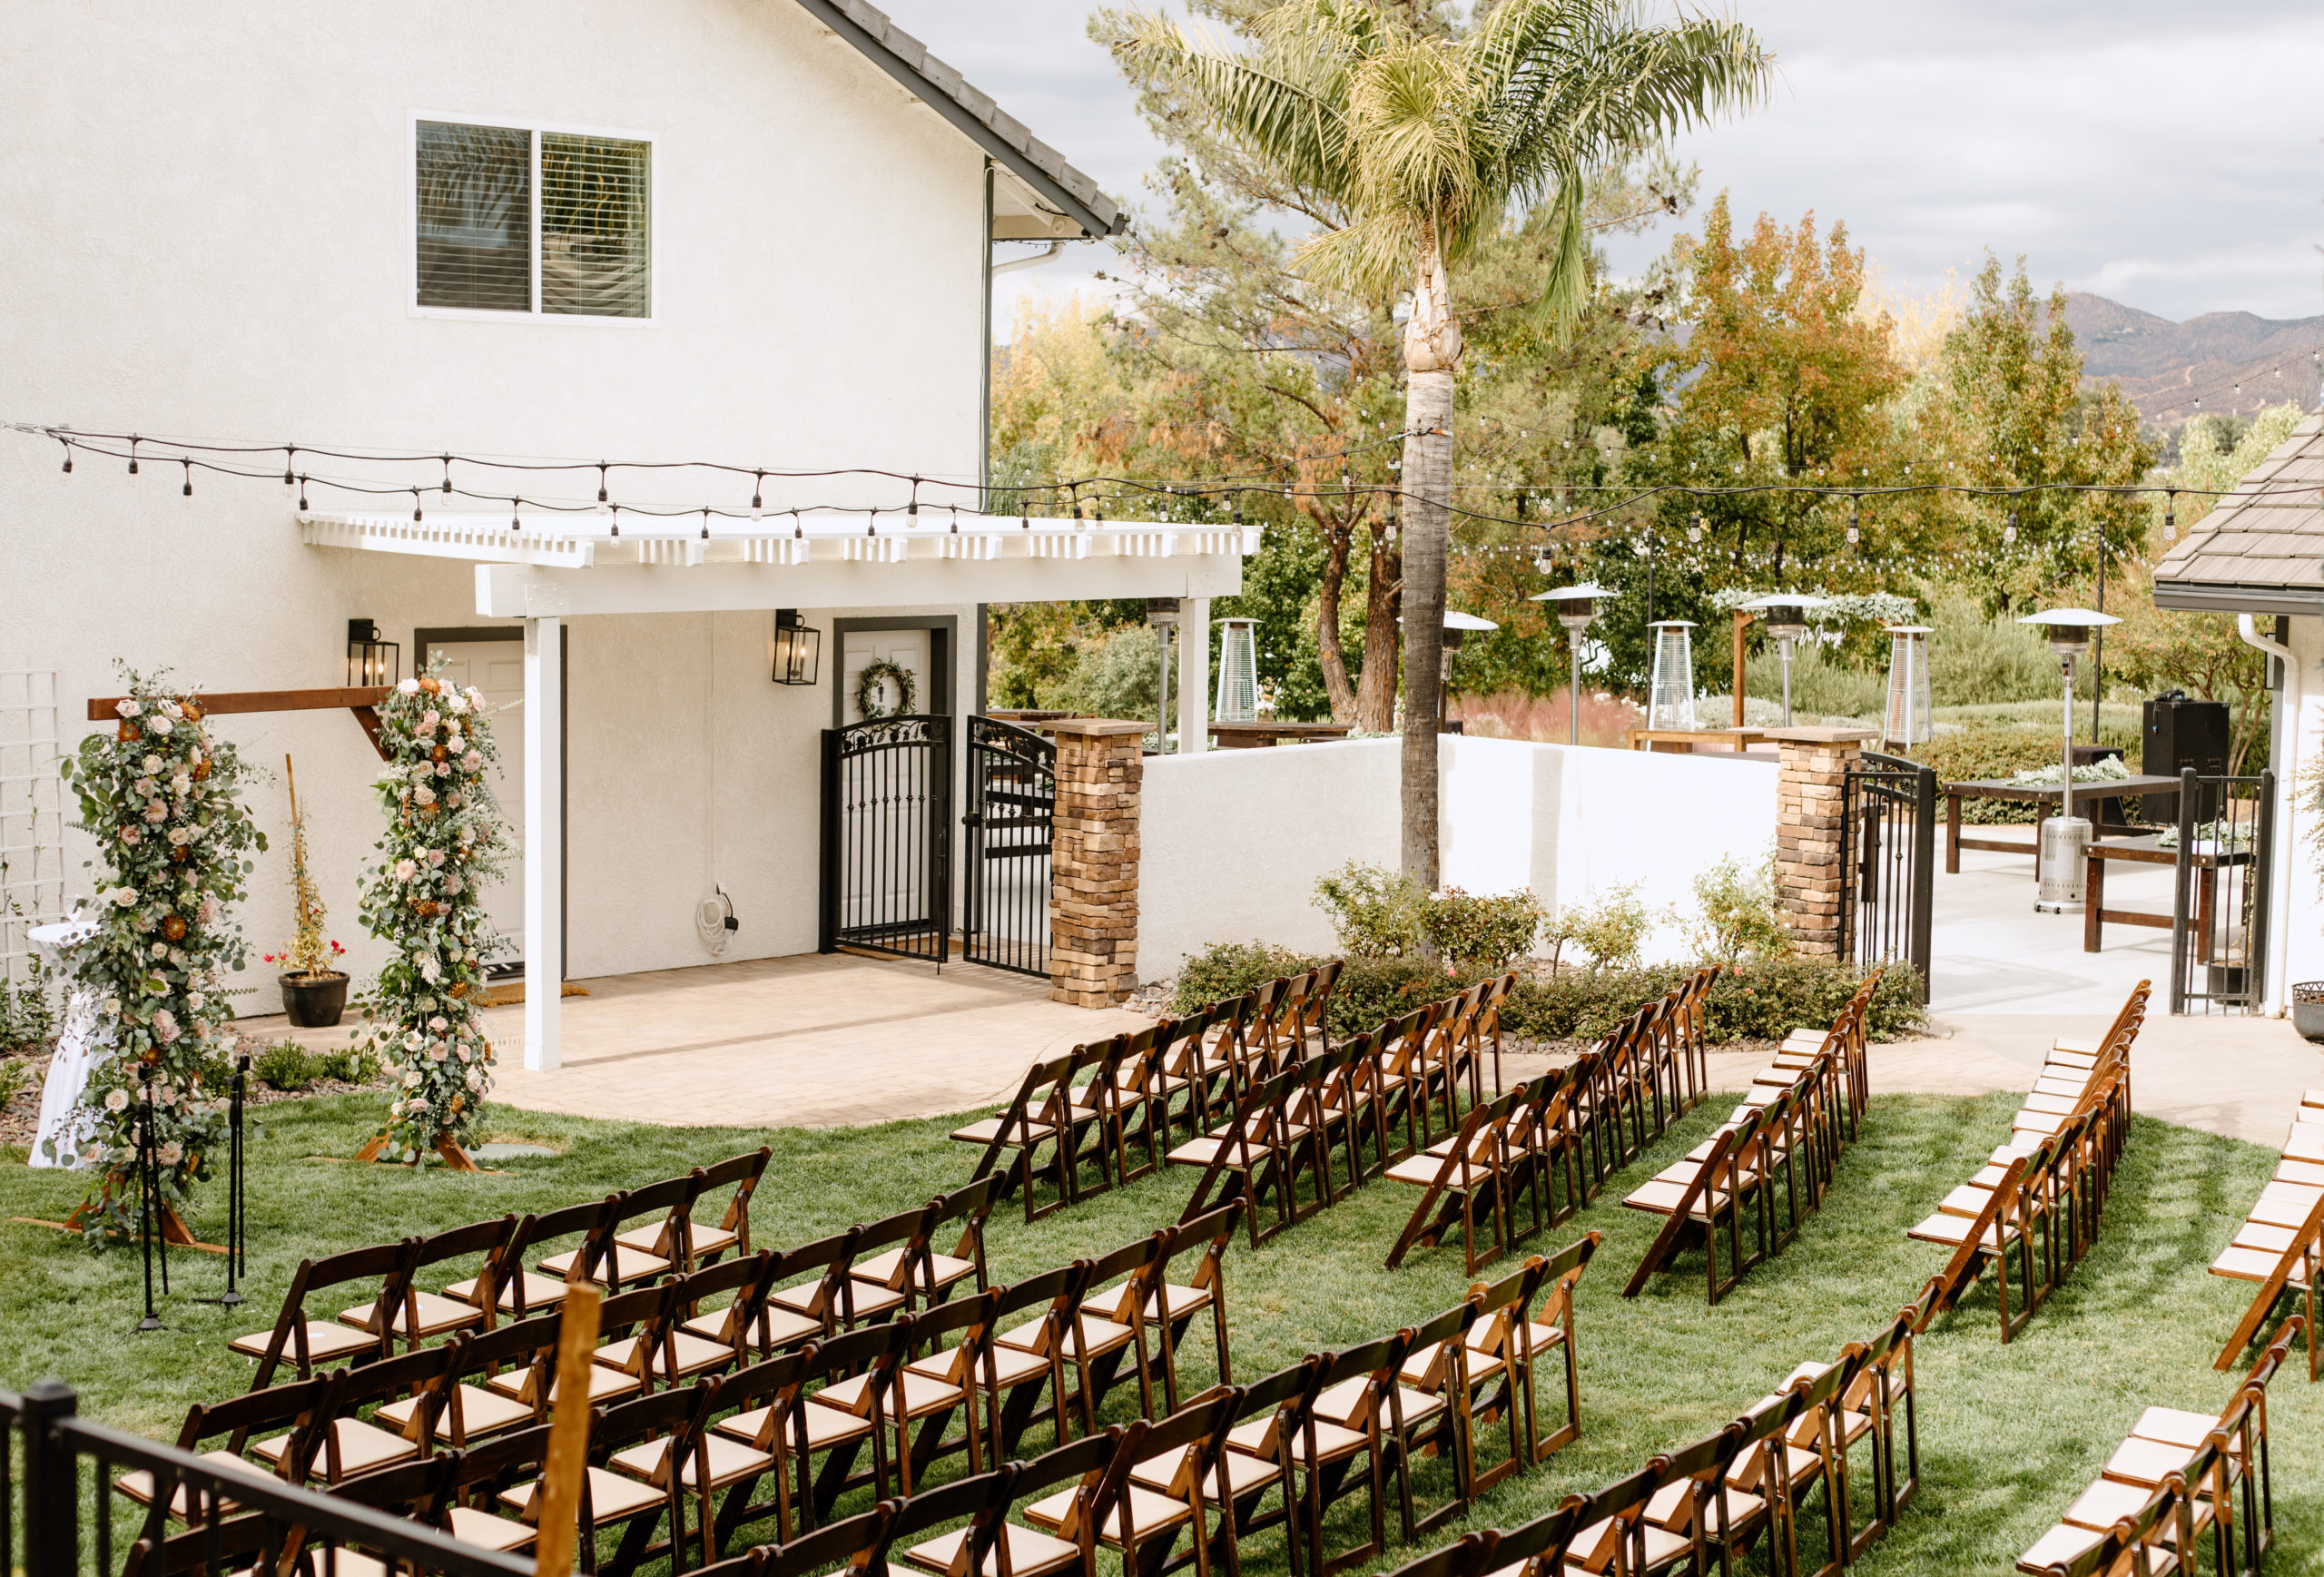 The ceremony site set up all cute in the backyard in Temecula